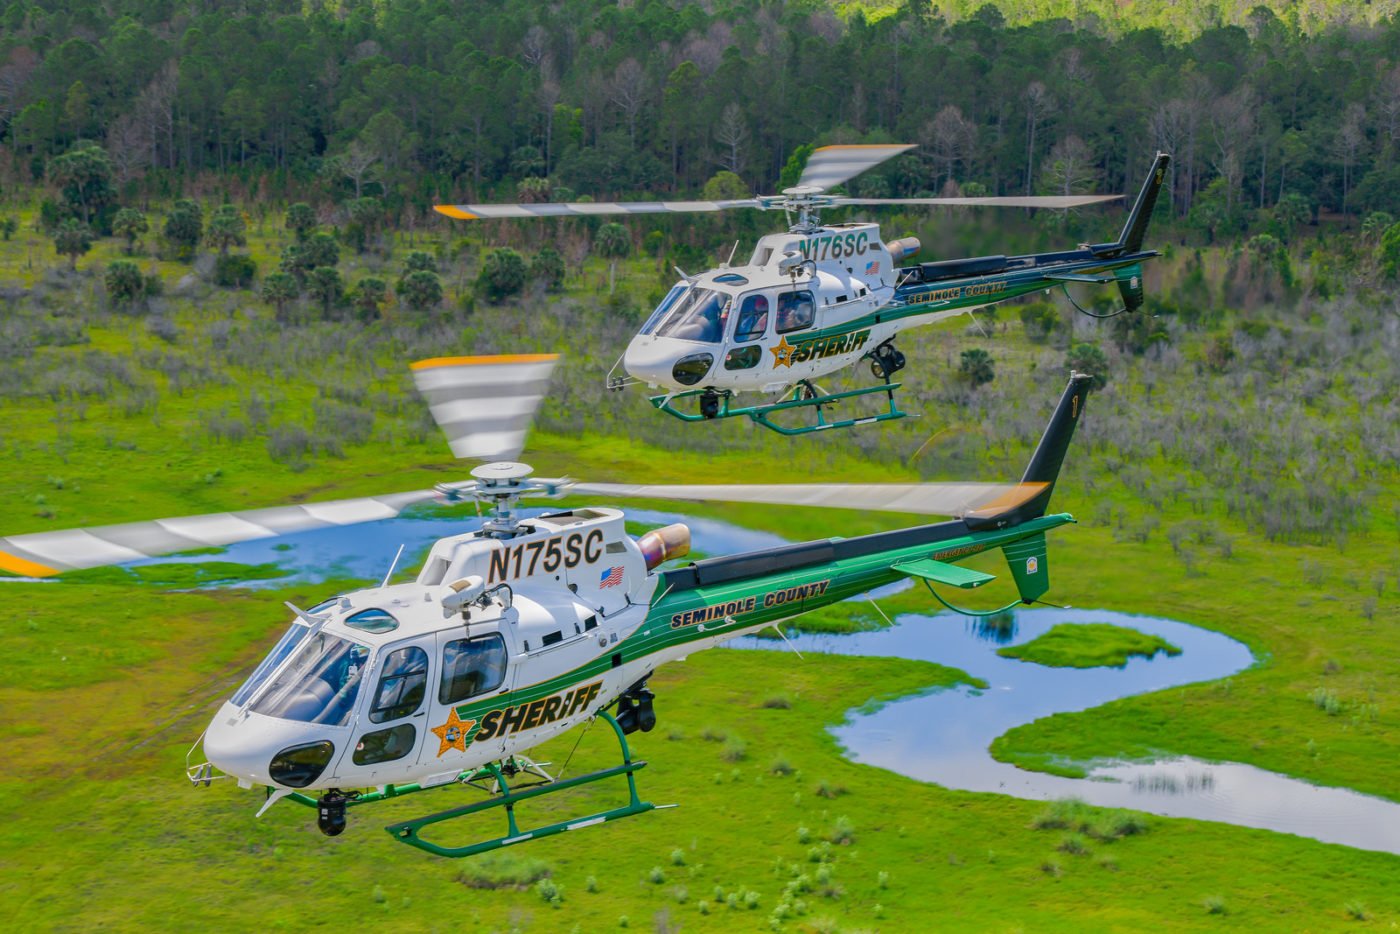 The SCSO Aviation Section currently operates two Airbus H125s, both completed by Metro Aviation. The air unit’s newest H125 (front), which it took possession of this year in exchange for its AS350 B3 from 2006, may be one of the most advanced helicopters in the airborne law enforcement field in North America. Mike Reyno Photo